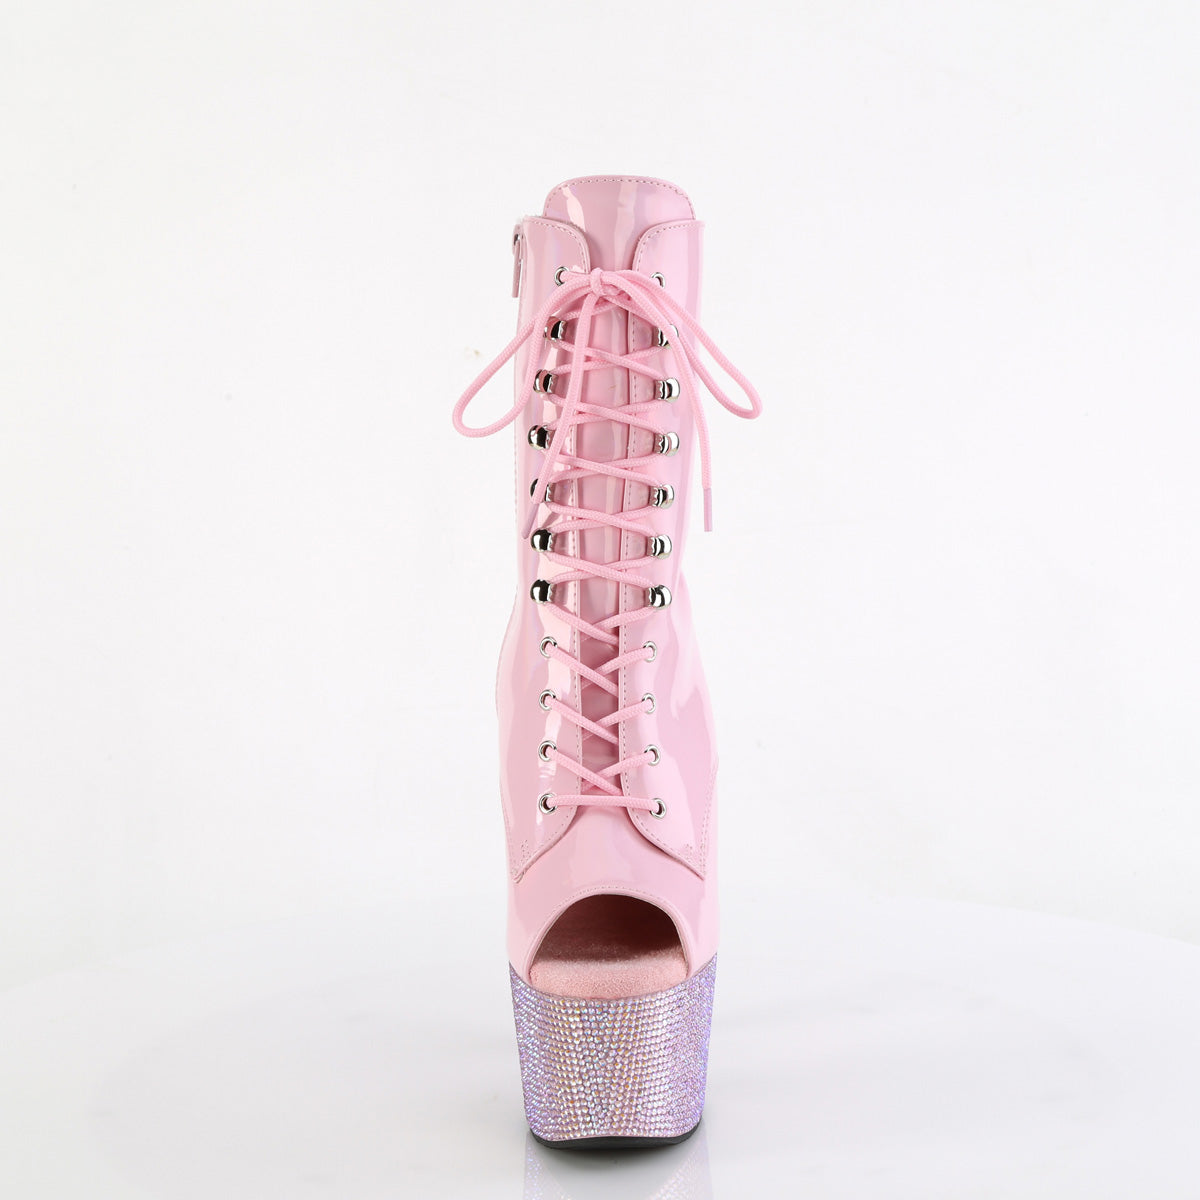 7 Inch Heel BEJEWELED-1021-7 Baby Pink Holo Patent